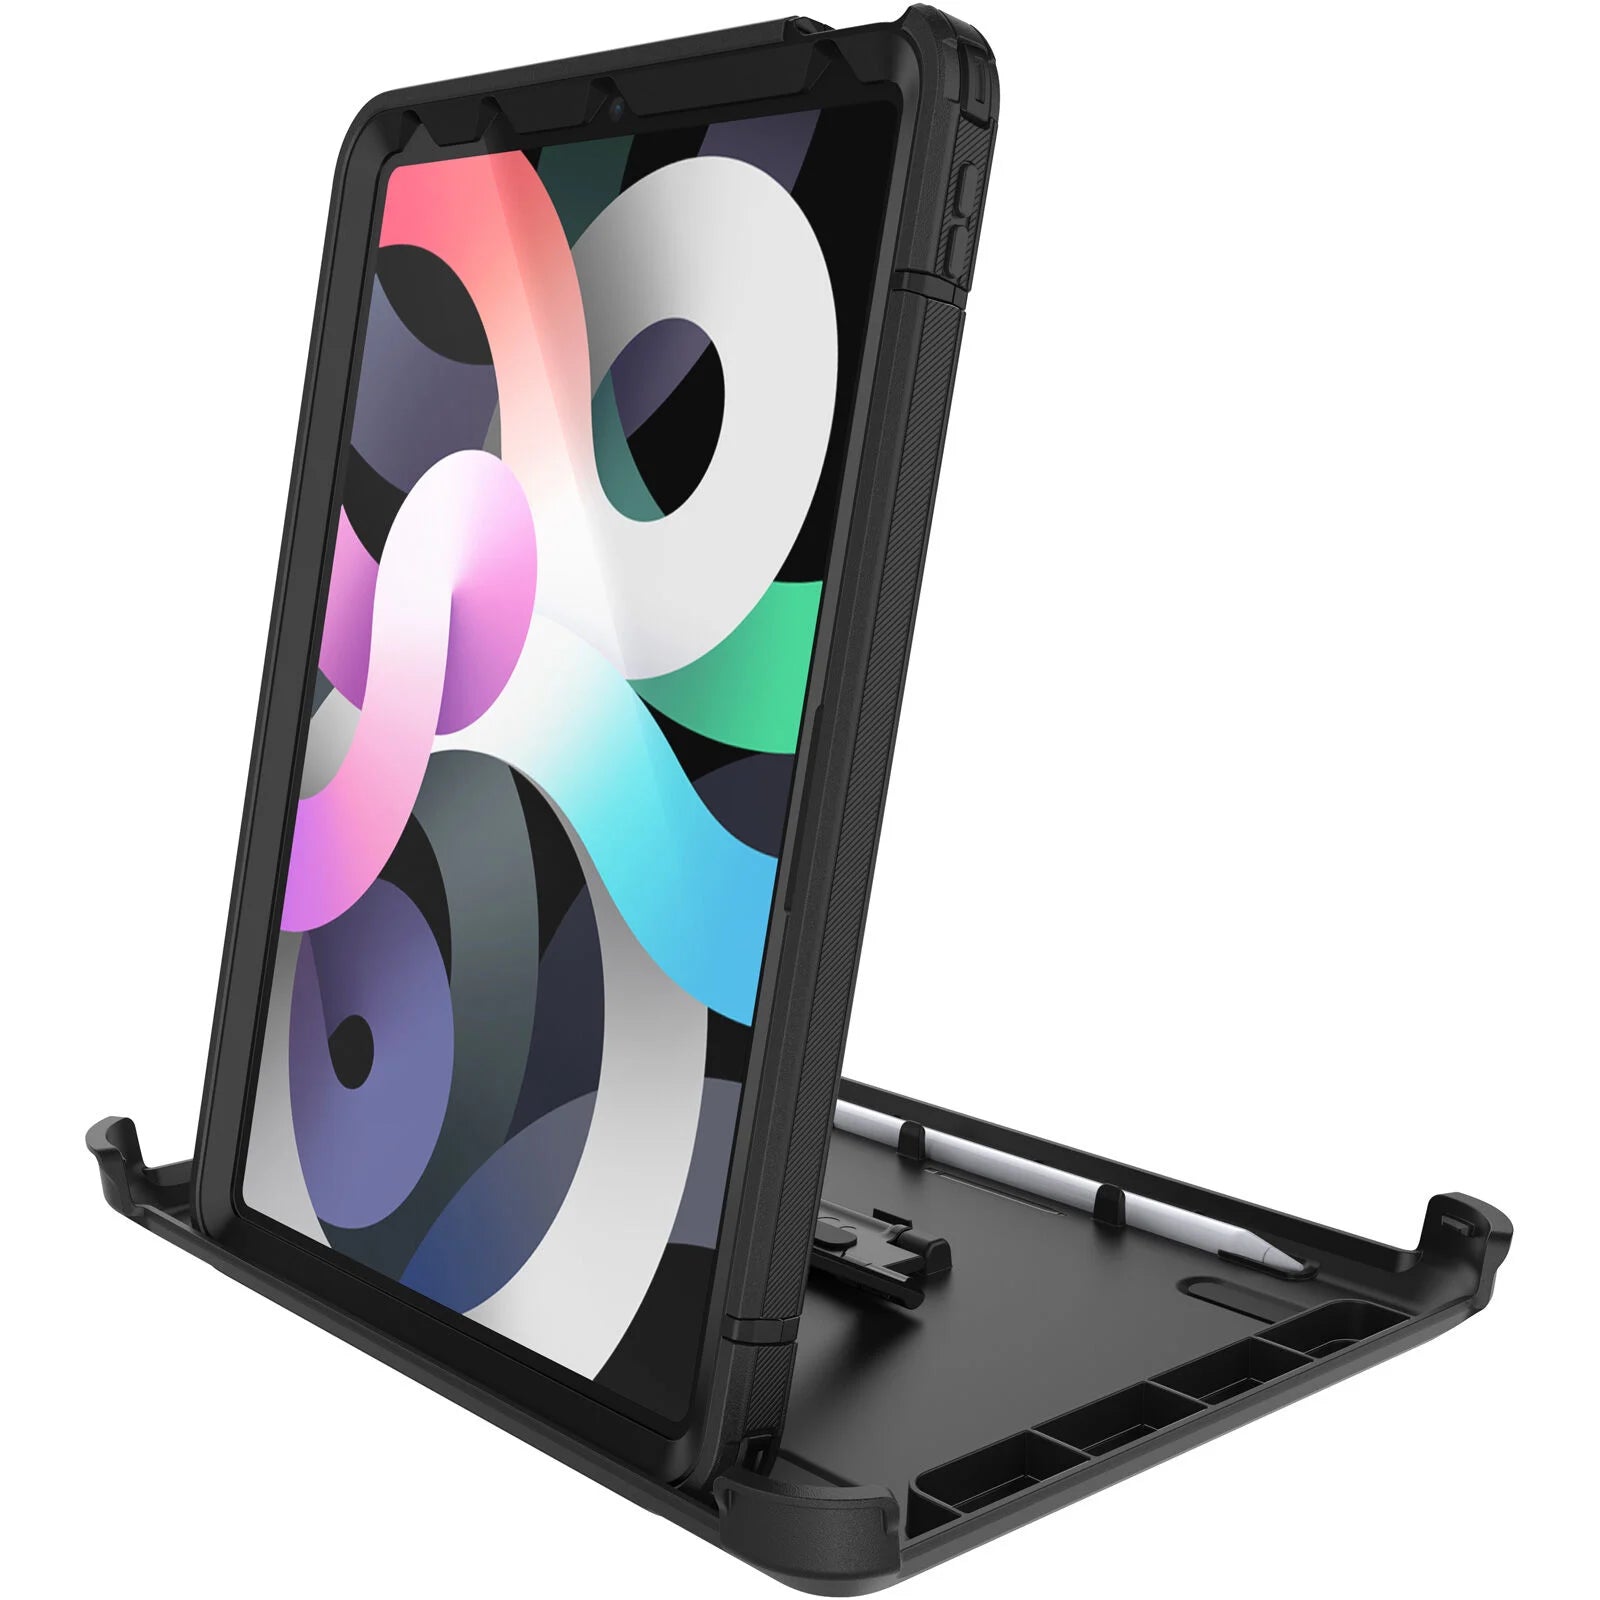 iPad Air (5th and 4th gen) Case, Defender Series